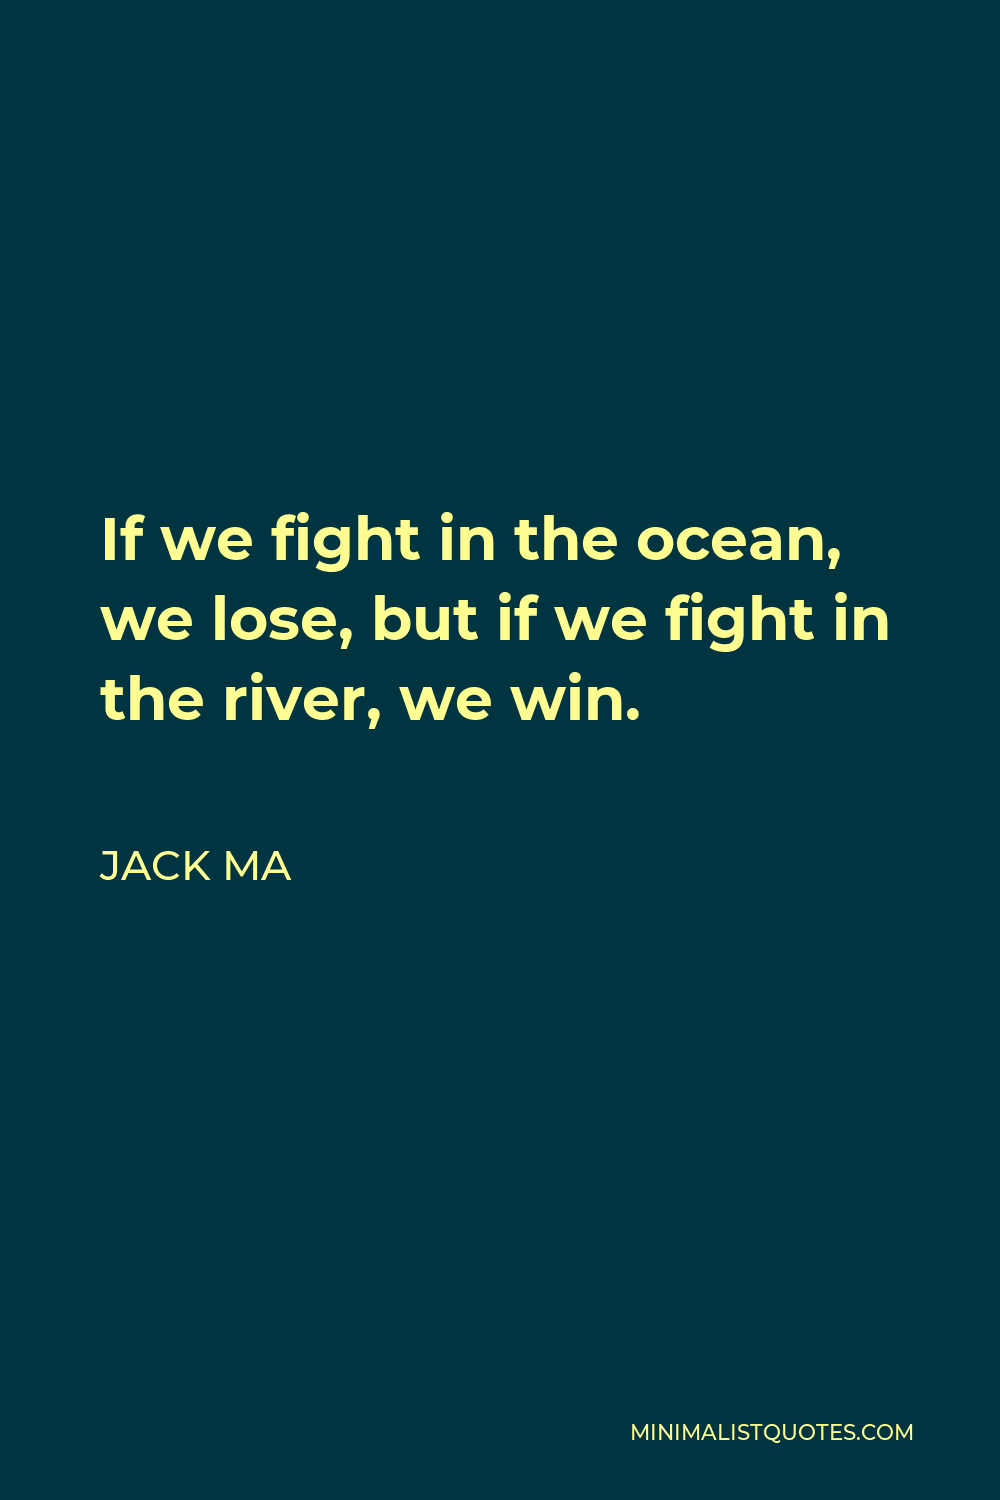 Jack Ma Quote - If we fight in the ocean, we lose, but if we fight in the river, we win.